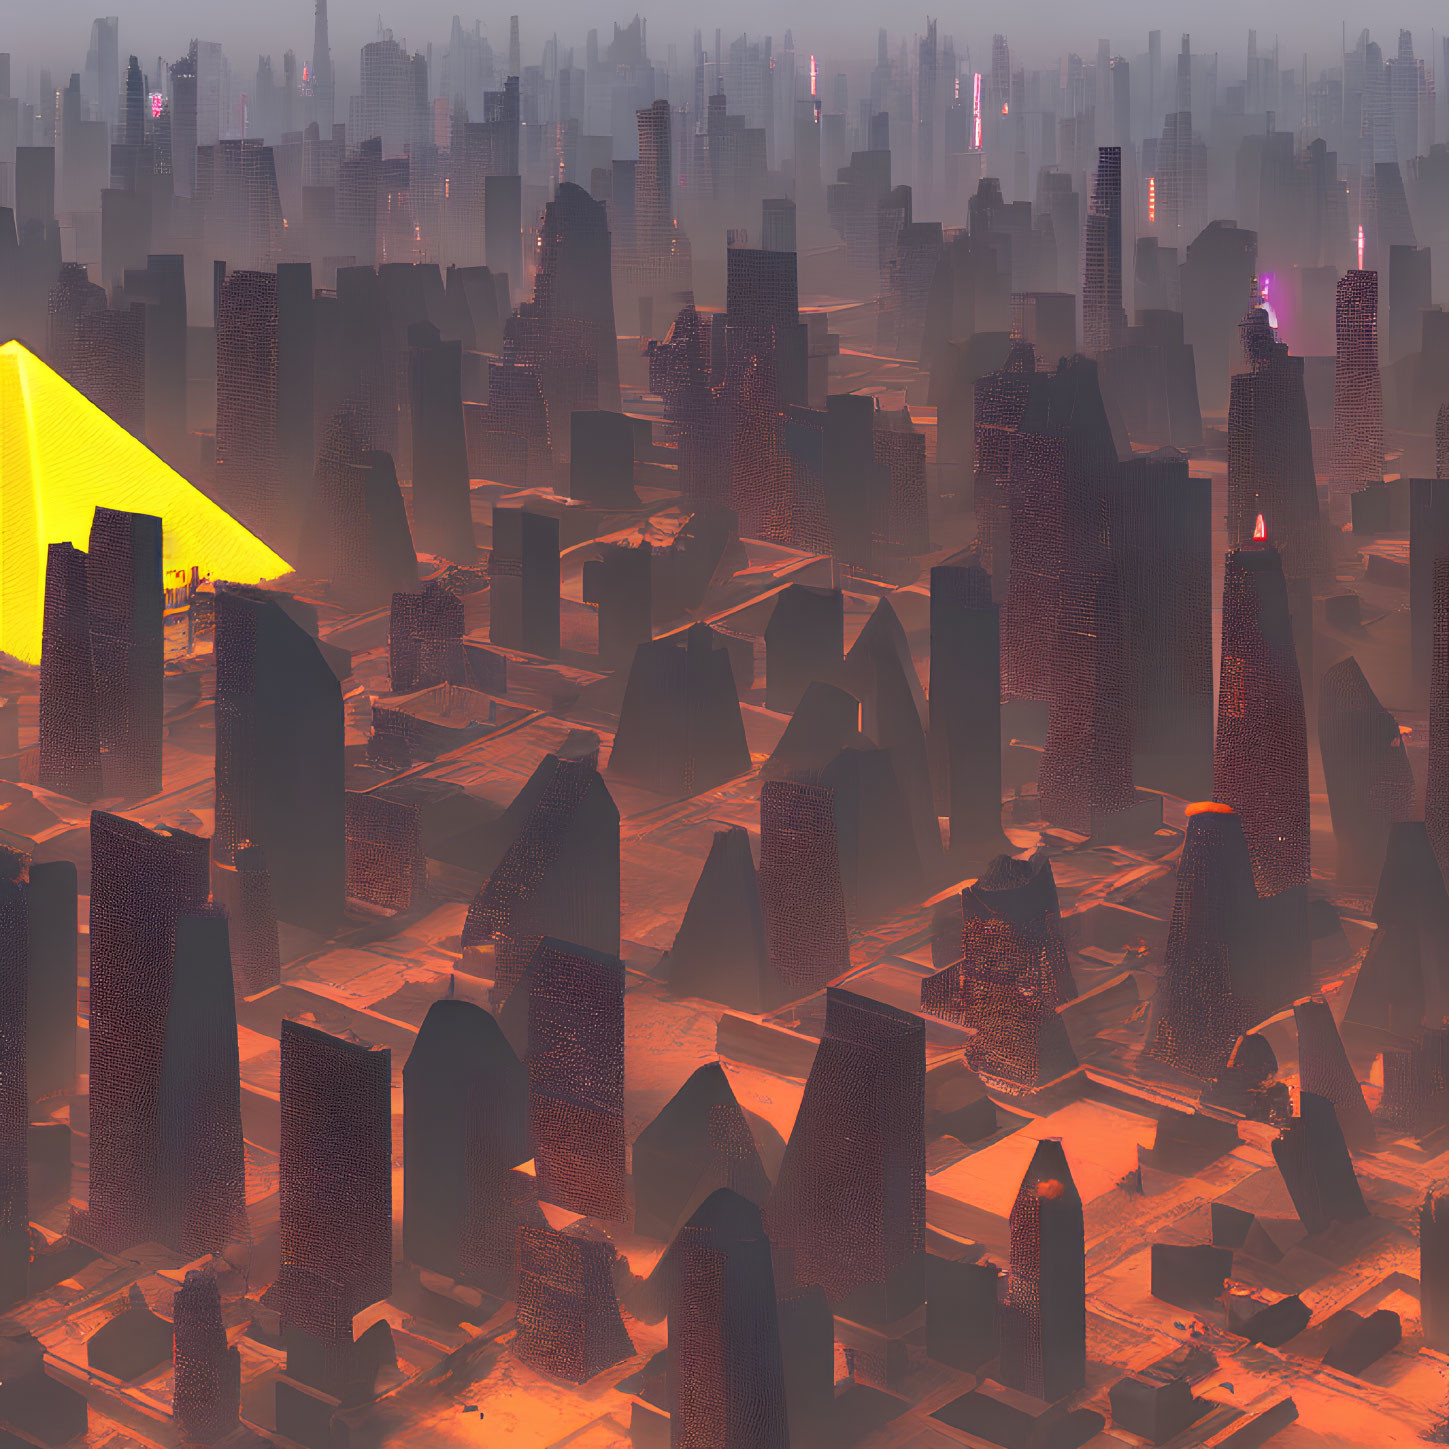 Dystopian cityscape at sunset with dense skyscrapers and neon signs